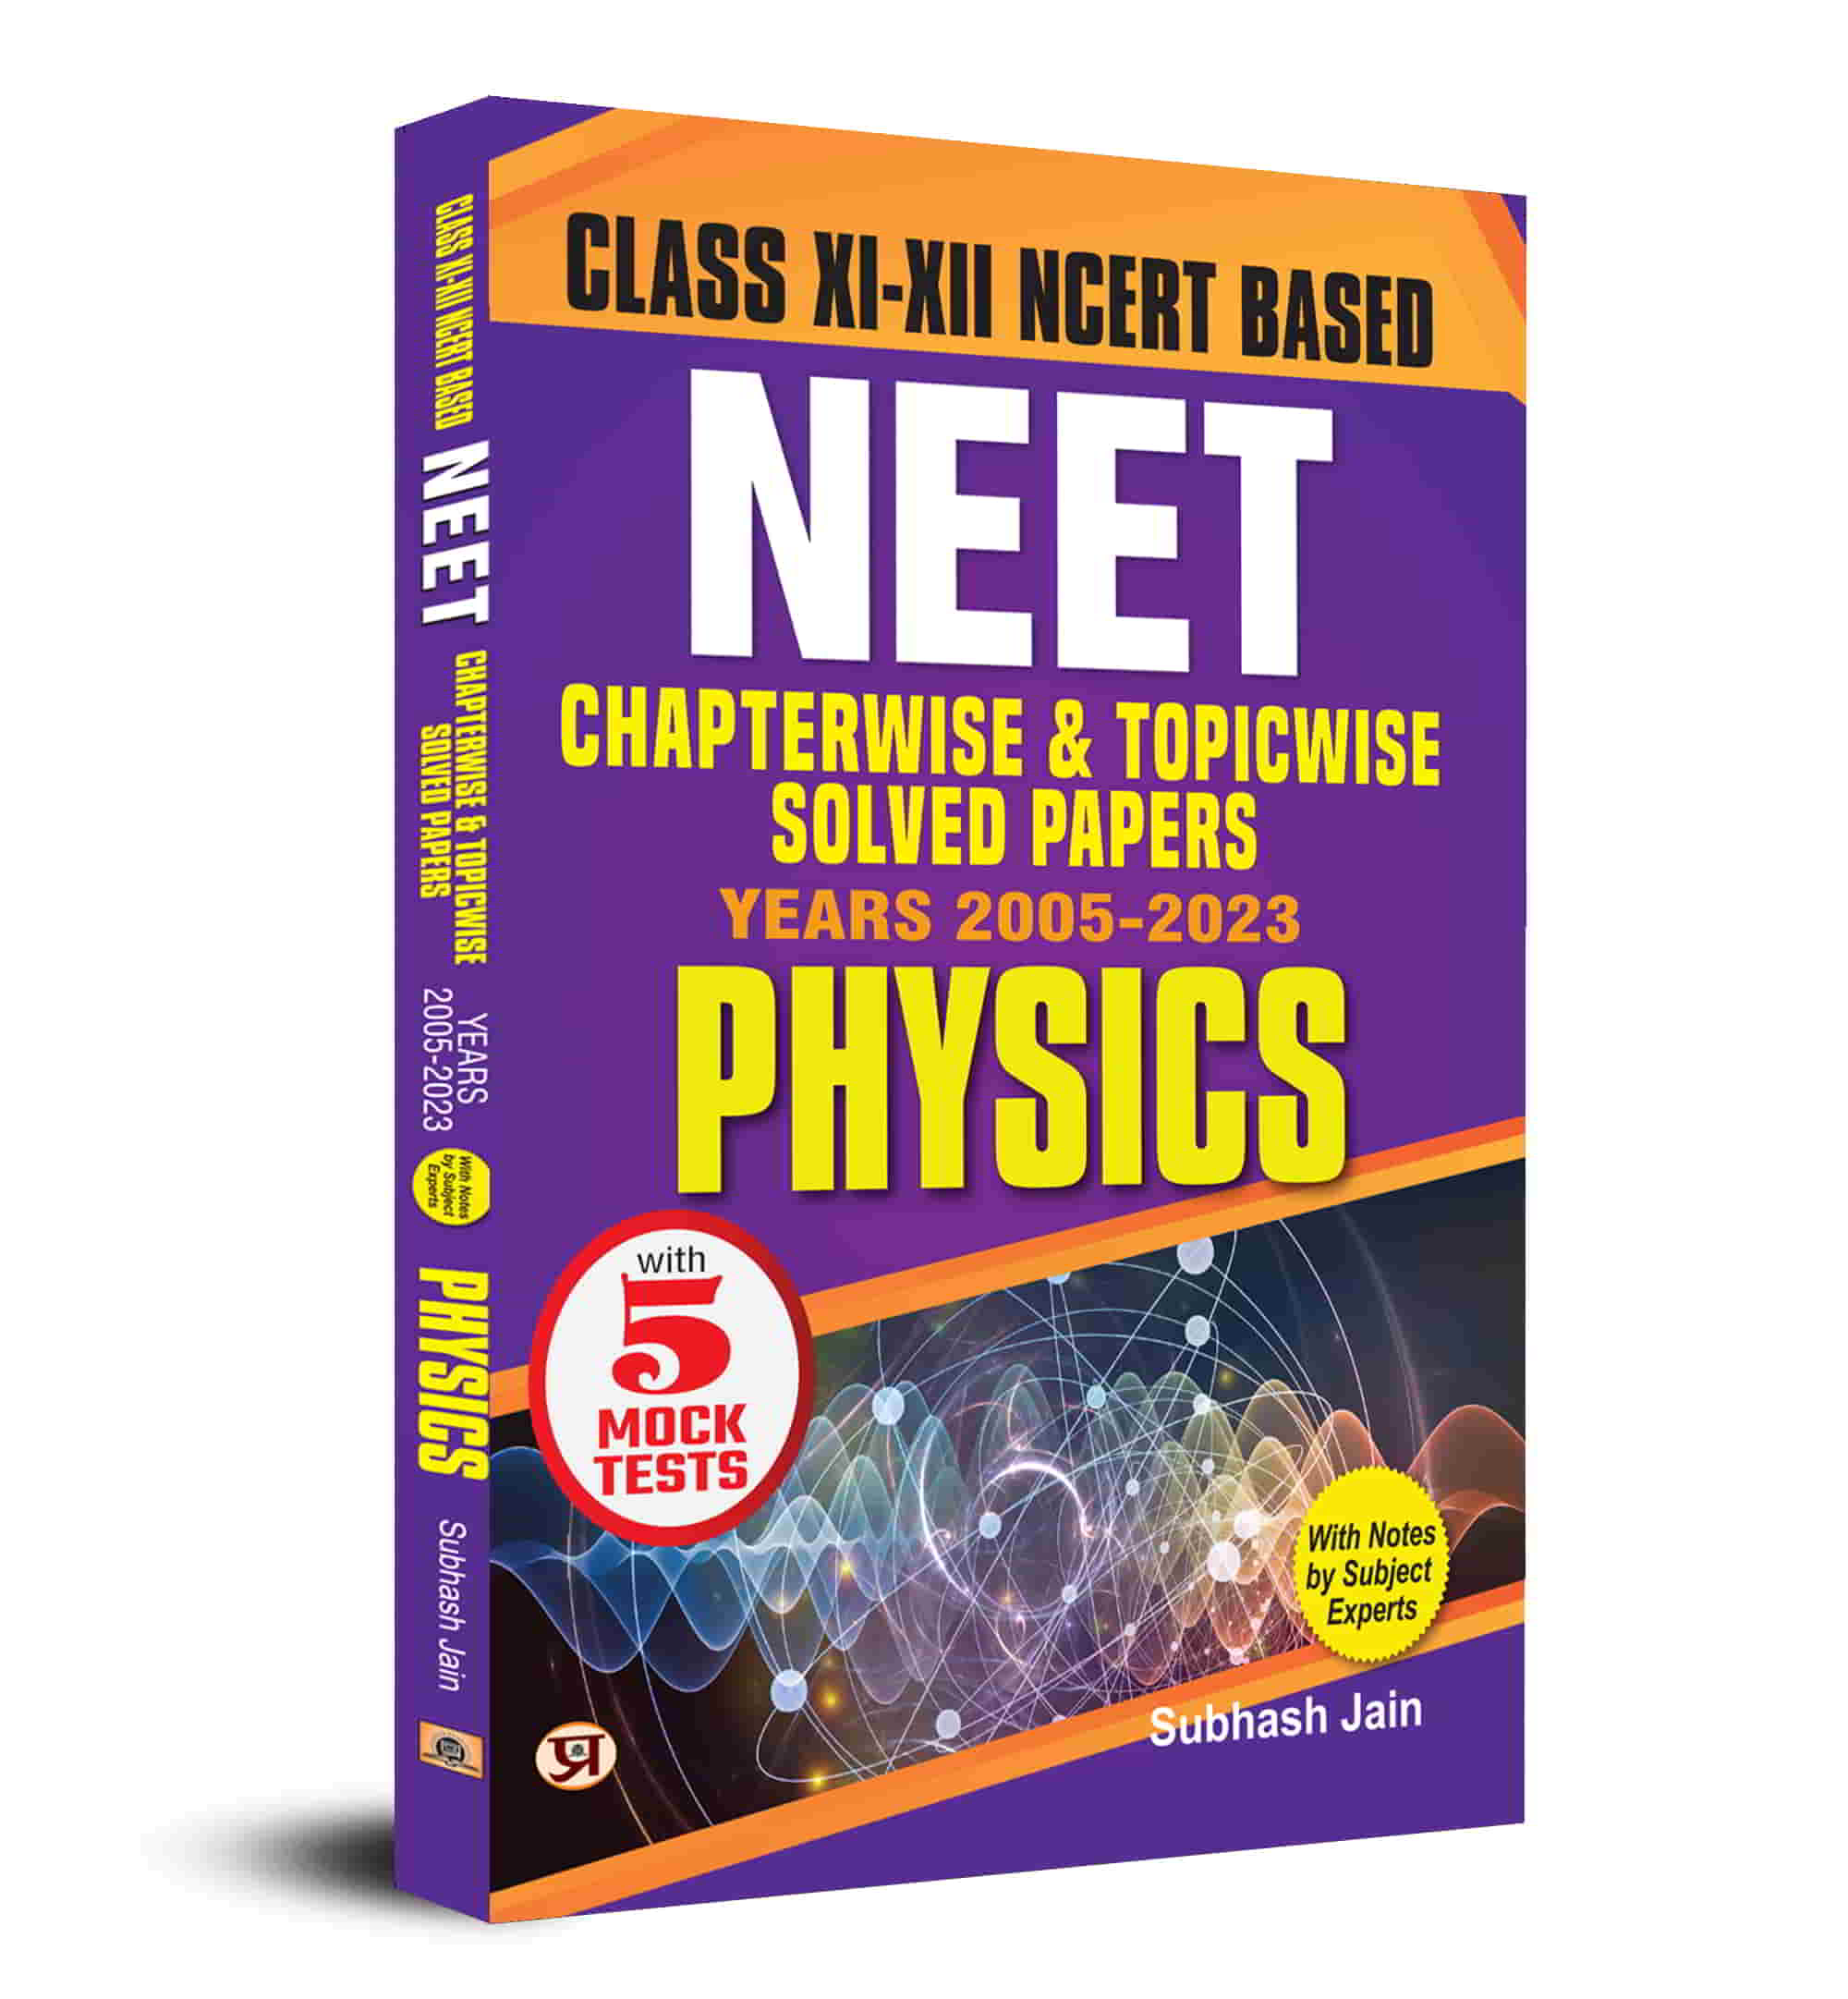 Objective NCERT Based Chapterwise Topicwise Solutions For 11th And 12th Class with Solved Papers (2005 -2023) with Notes for NEET-AIIMS Exam 2024 - Physics